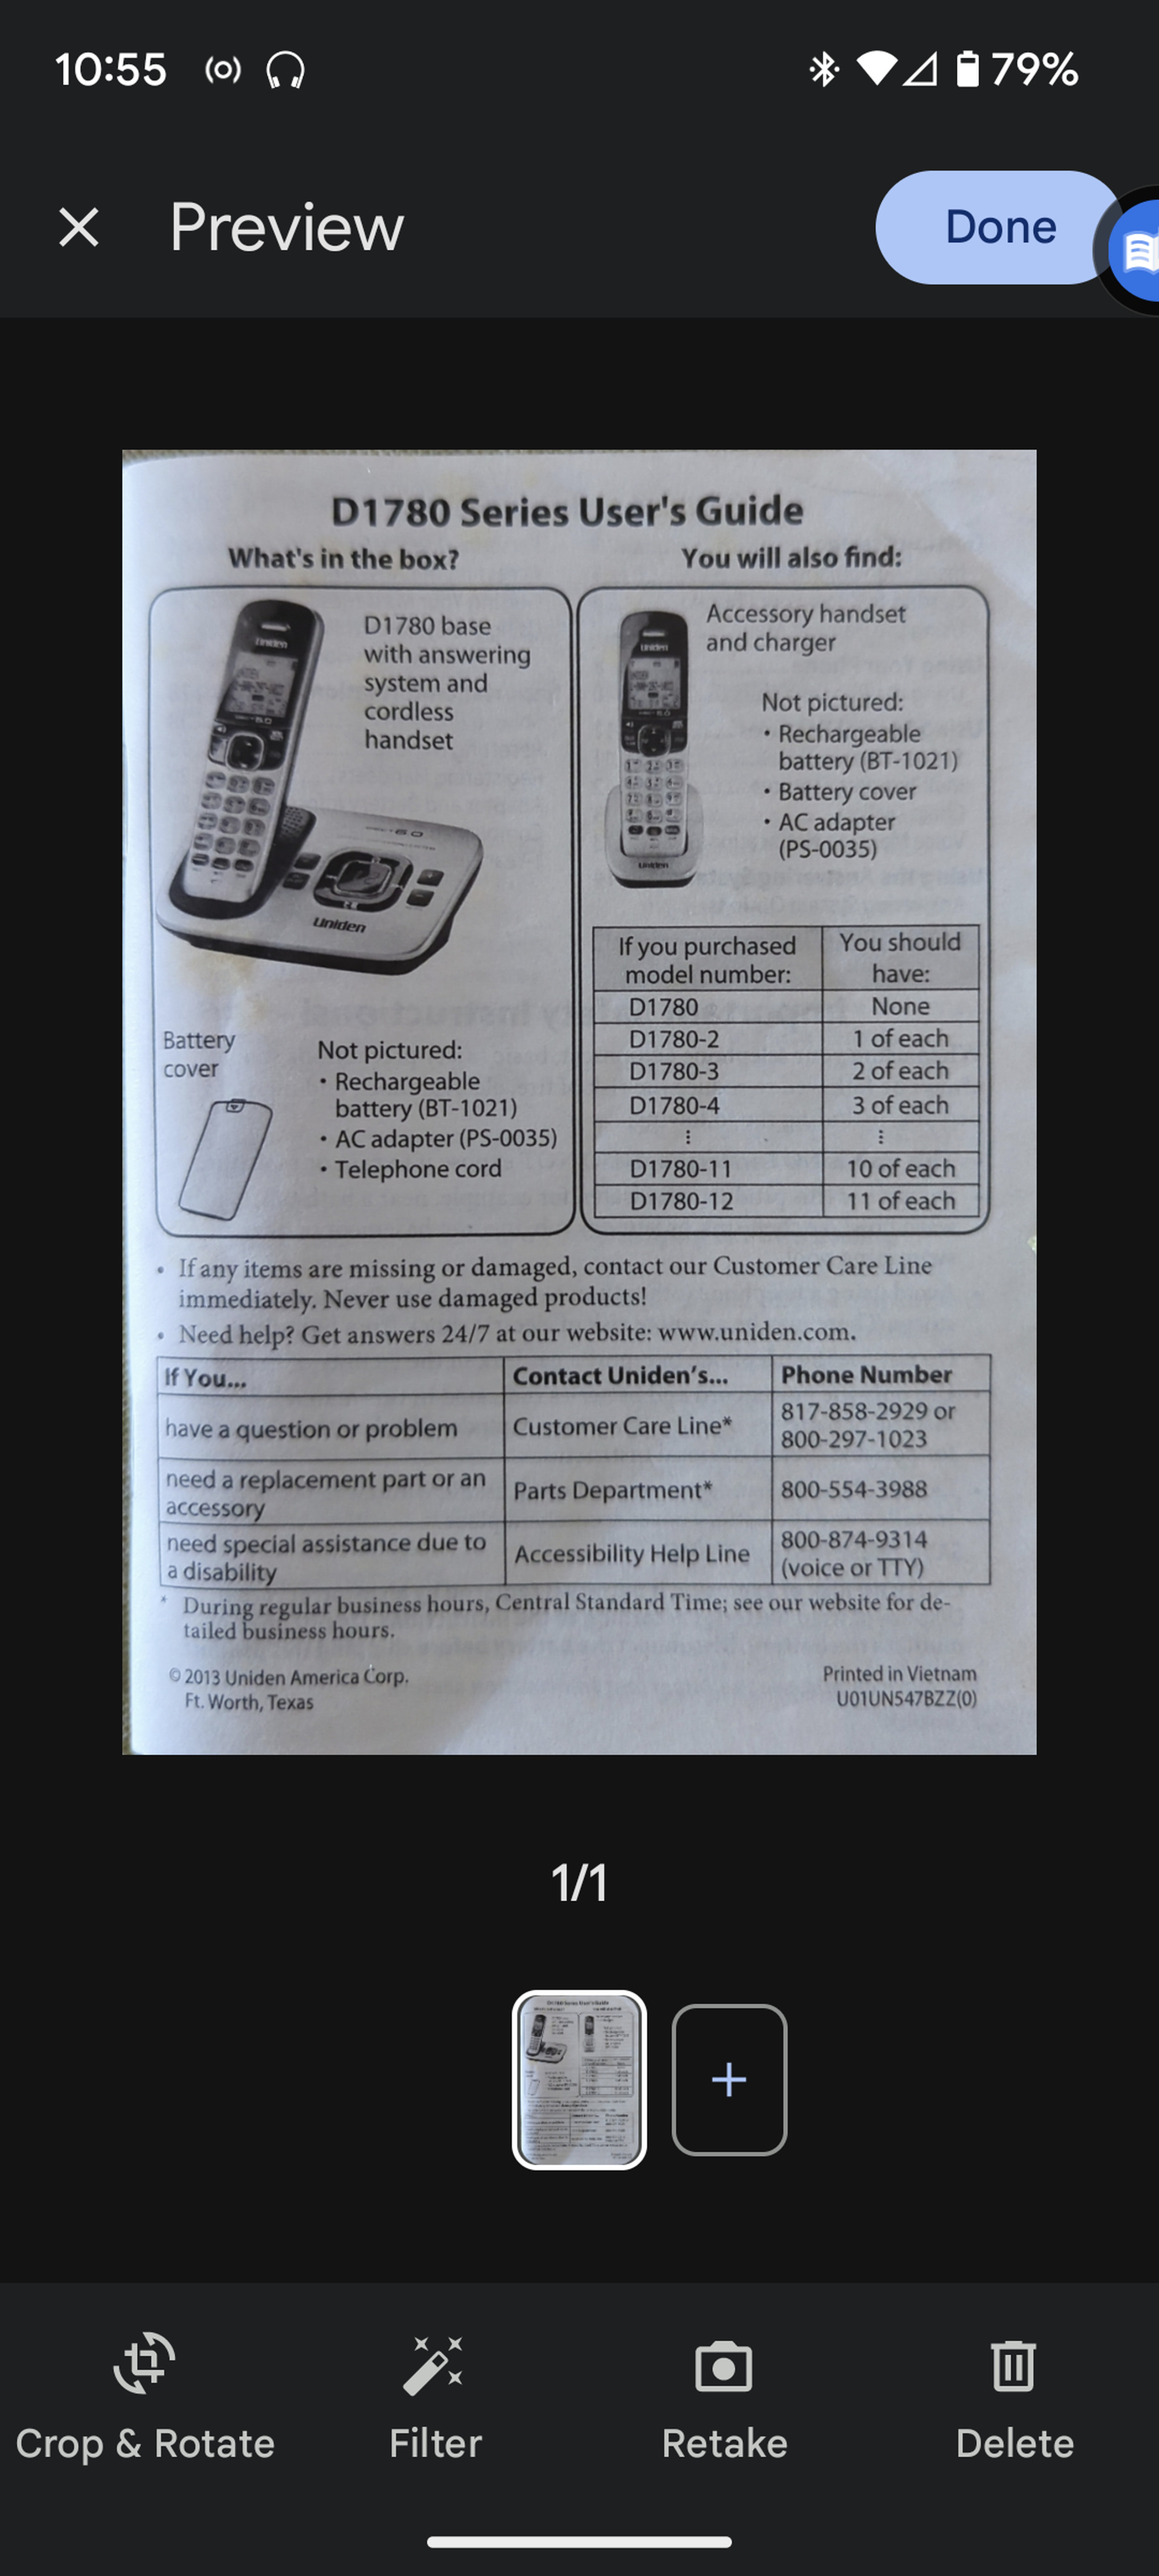 Photo of manual for old-fashioned phone with several feature buttons at bottom.